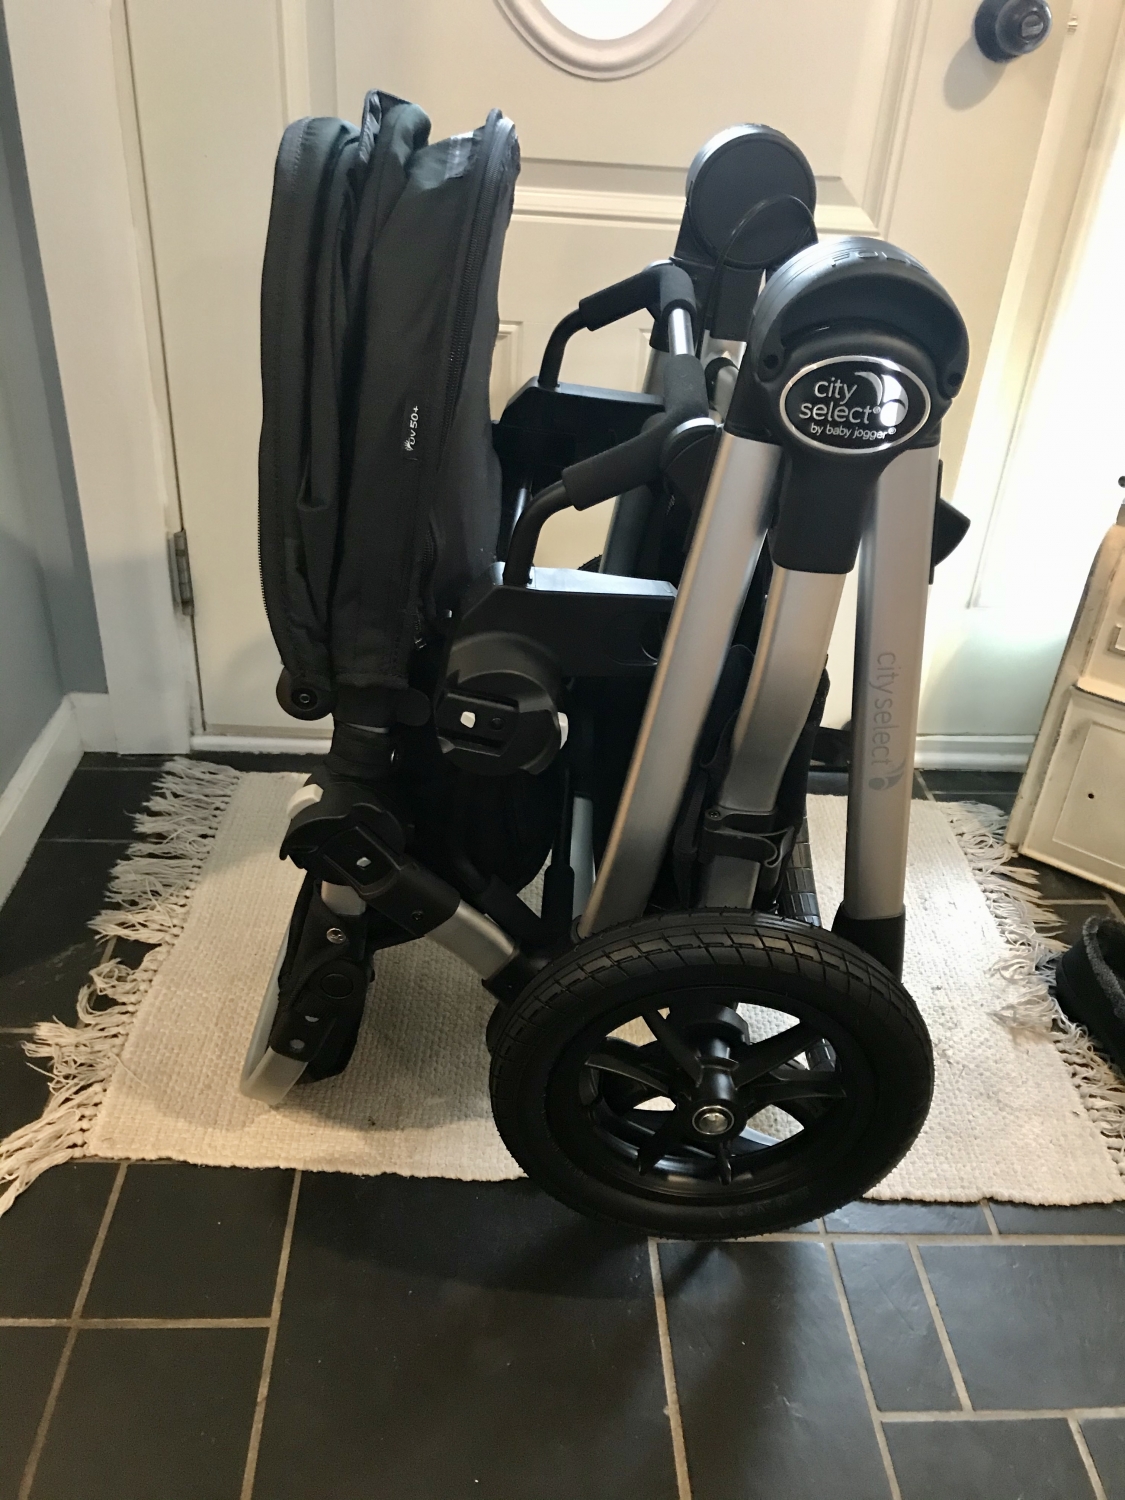 city select double stroller wheels